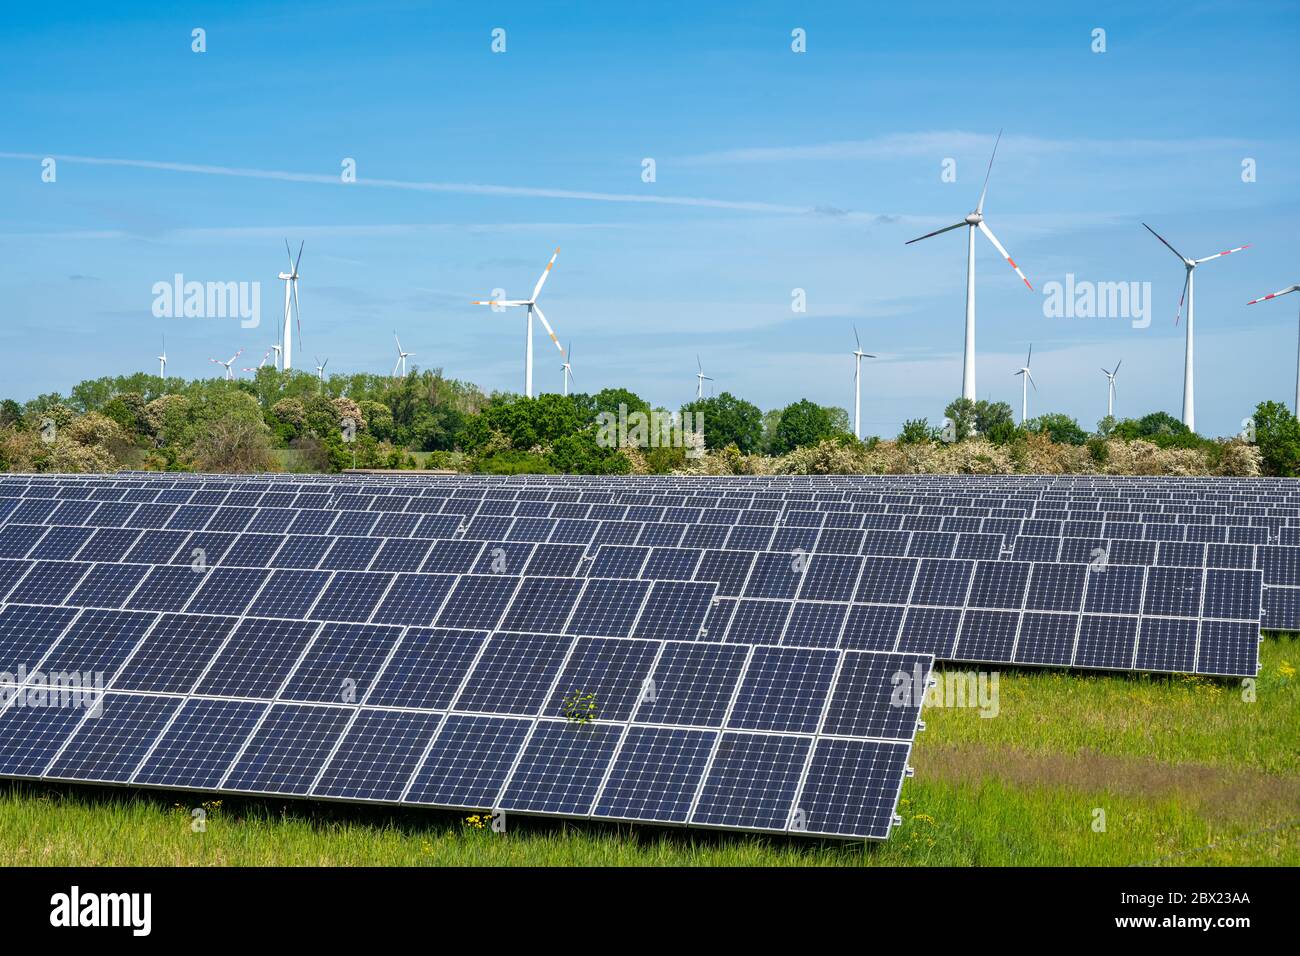 Solar panels with wind wheels in the back seen in Germany Stock Photo